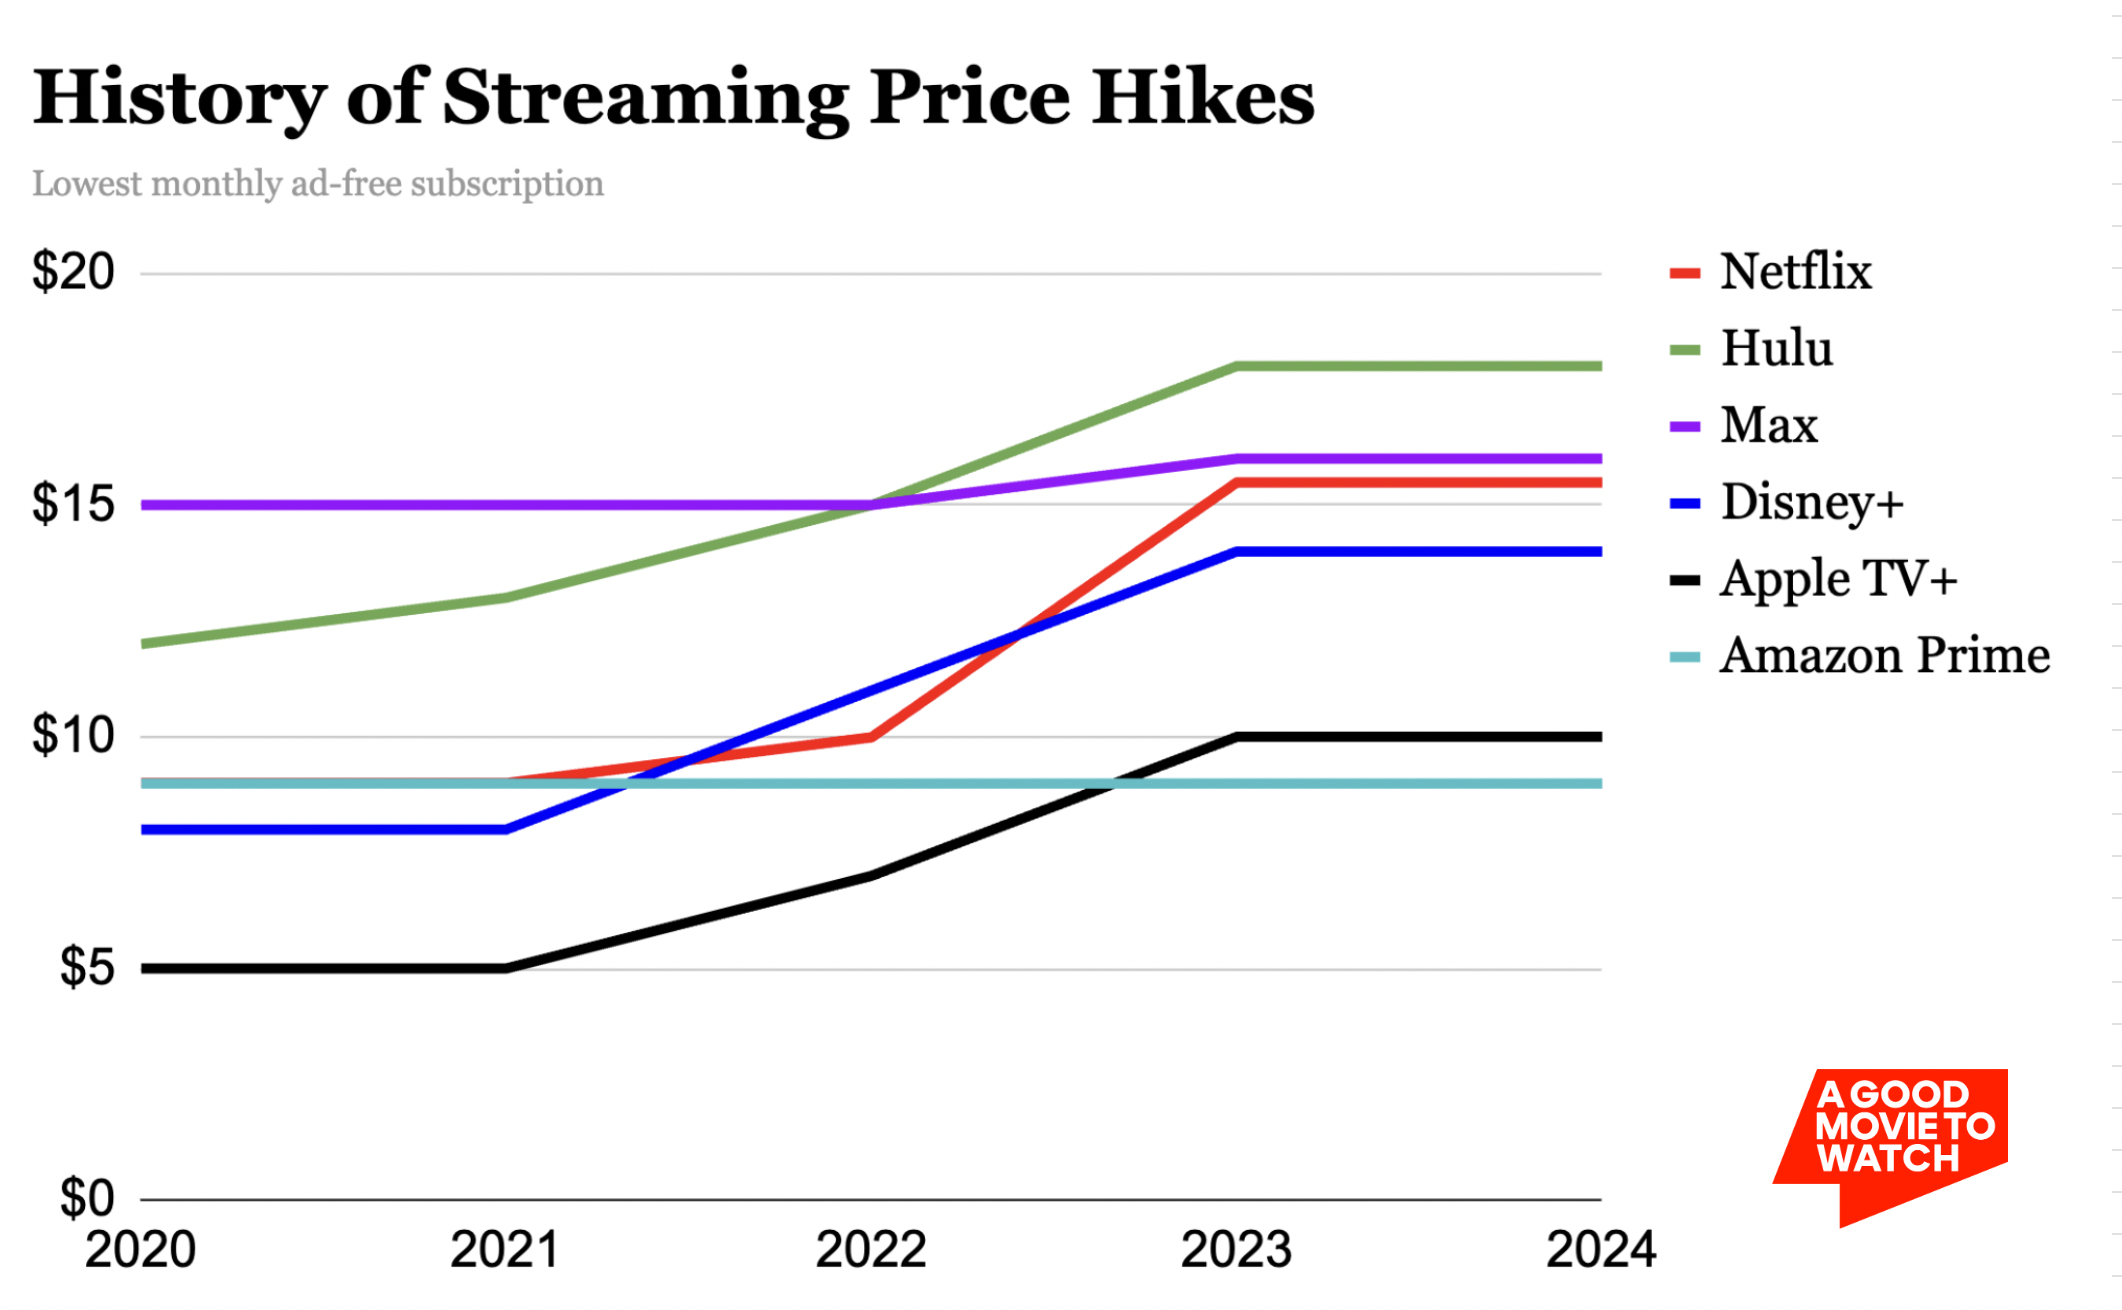 History of streaming price hikes